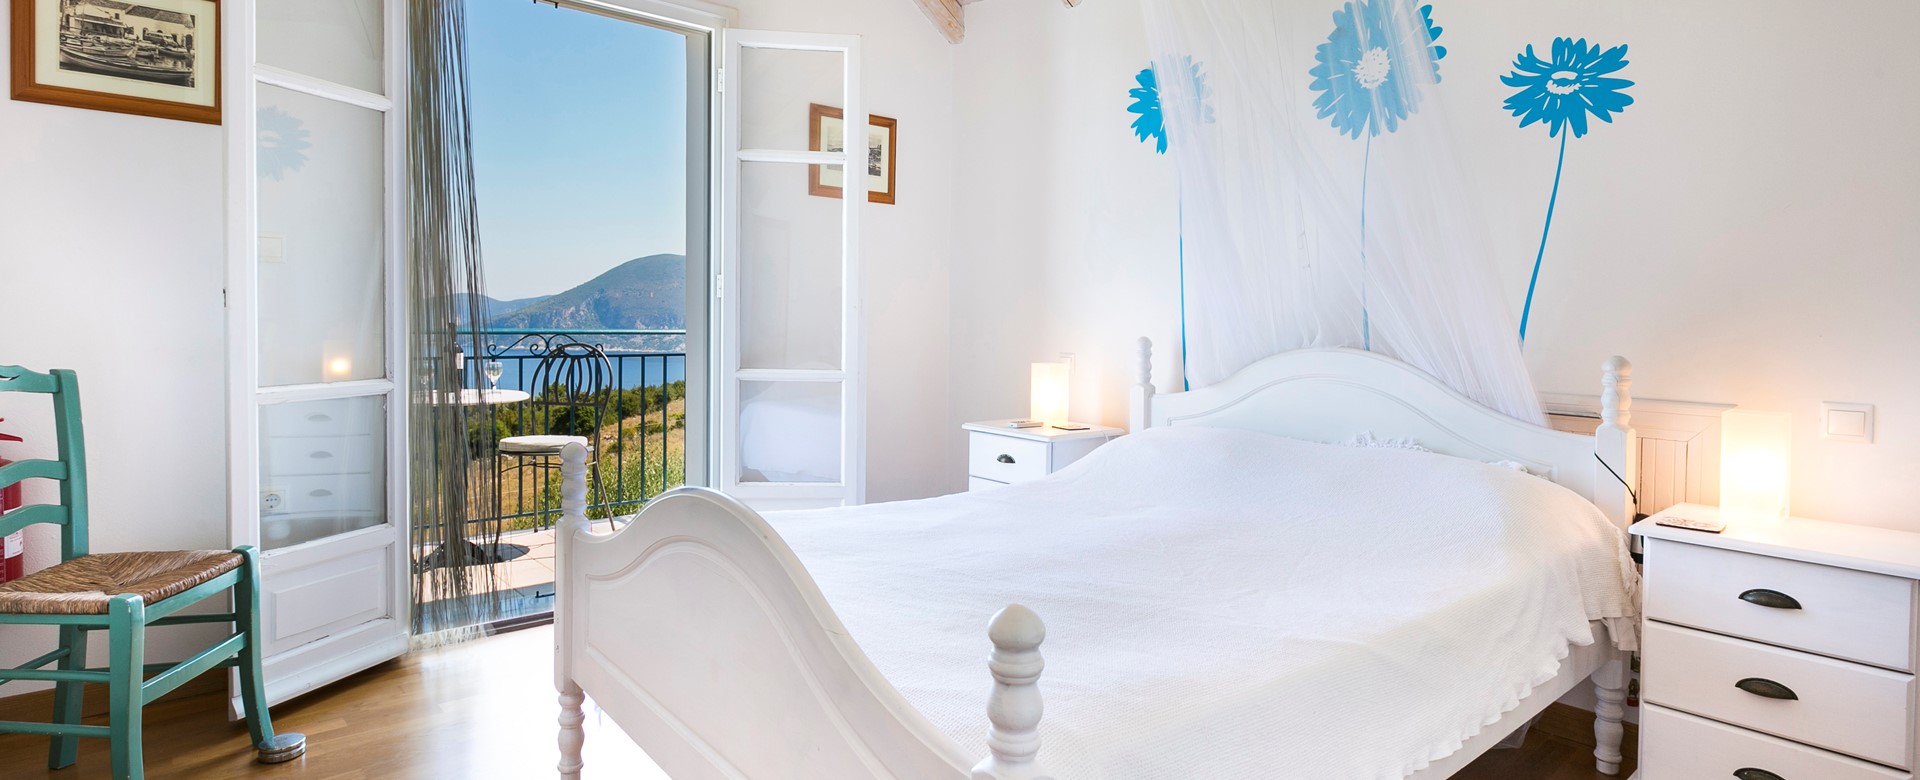 Fresh and bright double bedroom with terrace and views at Villa Lithia, Fiscardo, Kefalonia, Greek Islands